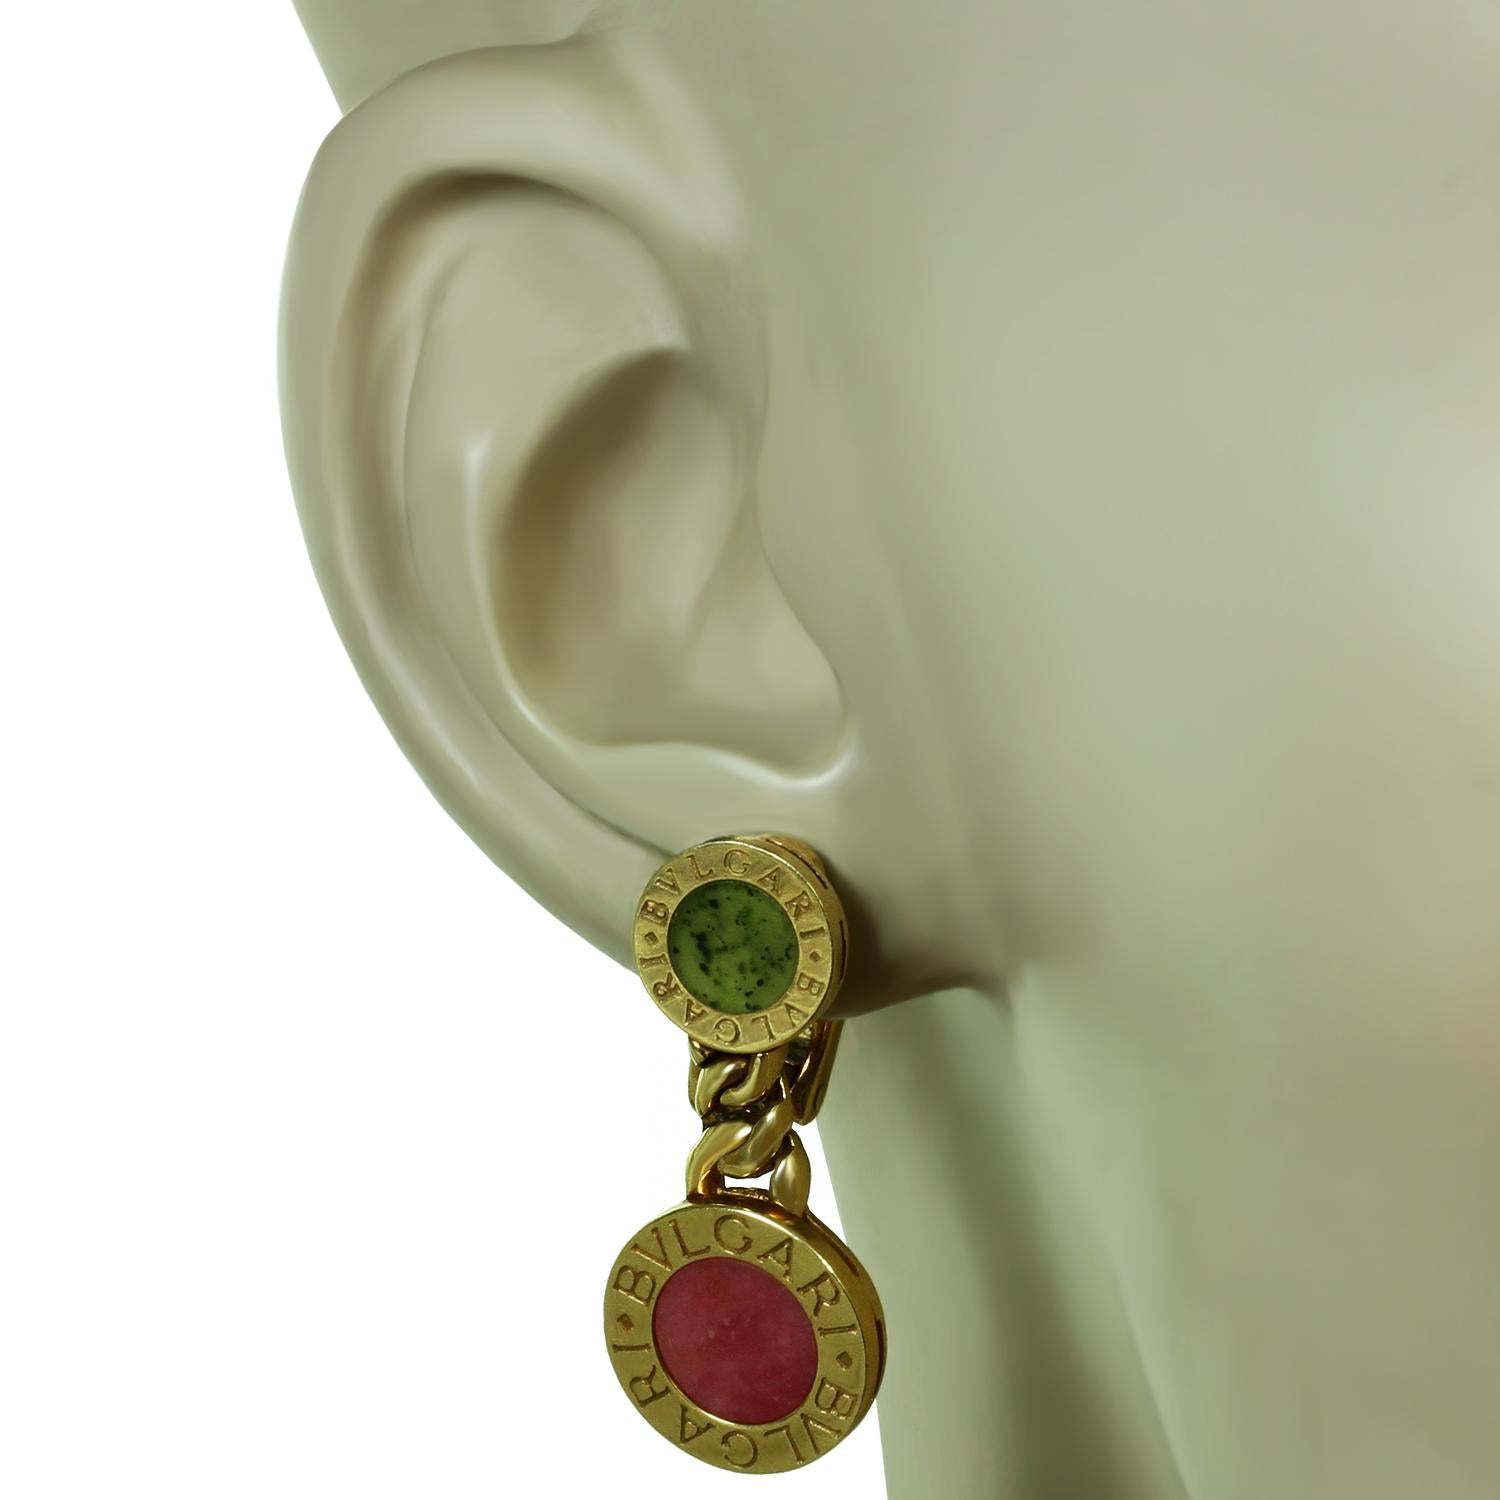 These gorgeous modern Bulgari drop earrings are crafted in 18k yellow gold and feature a pair of disc shapes inscribed with Bvlgari and set with rhodochrosite and jade. made in Italy circa 2010s. Measurements: 0.51